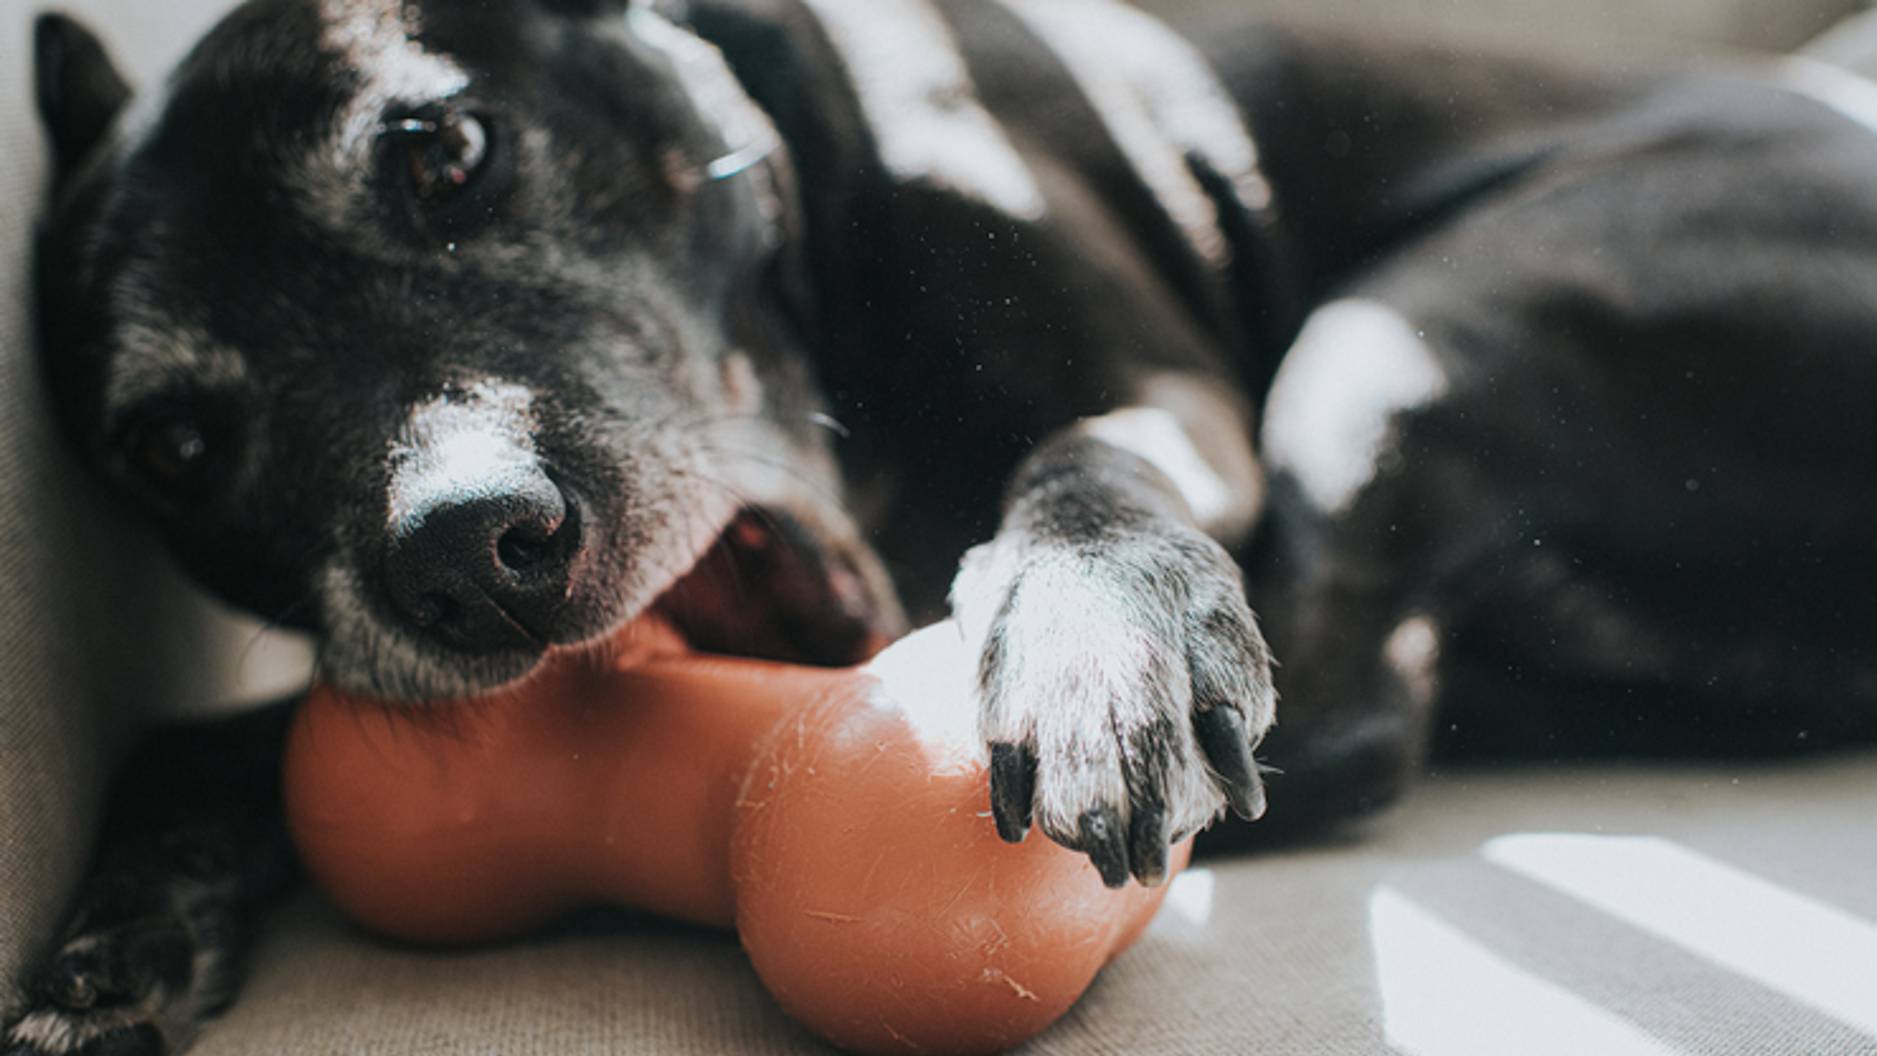 What Toys and Bones to Avoid Giving Your Dog - Animal Medical Center